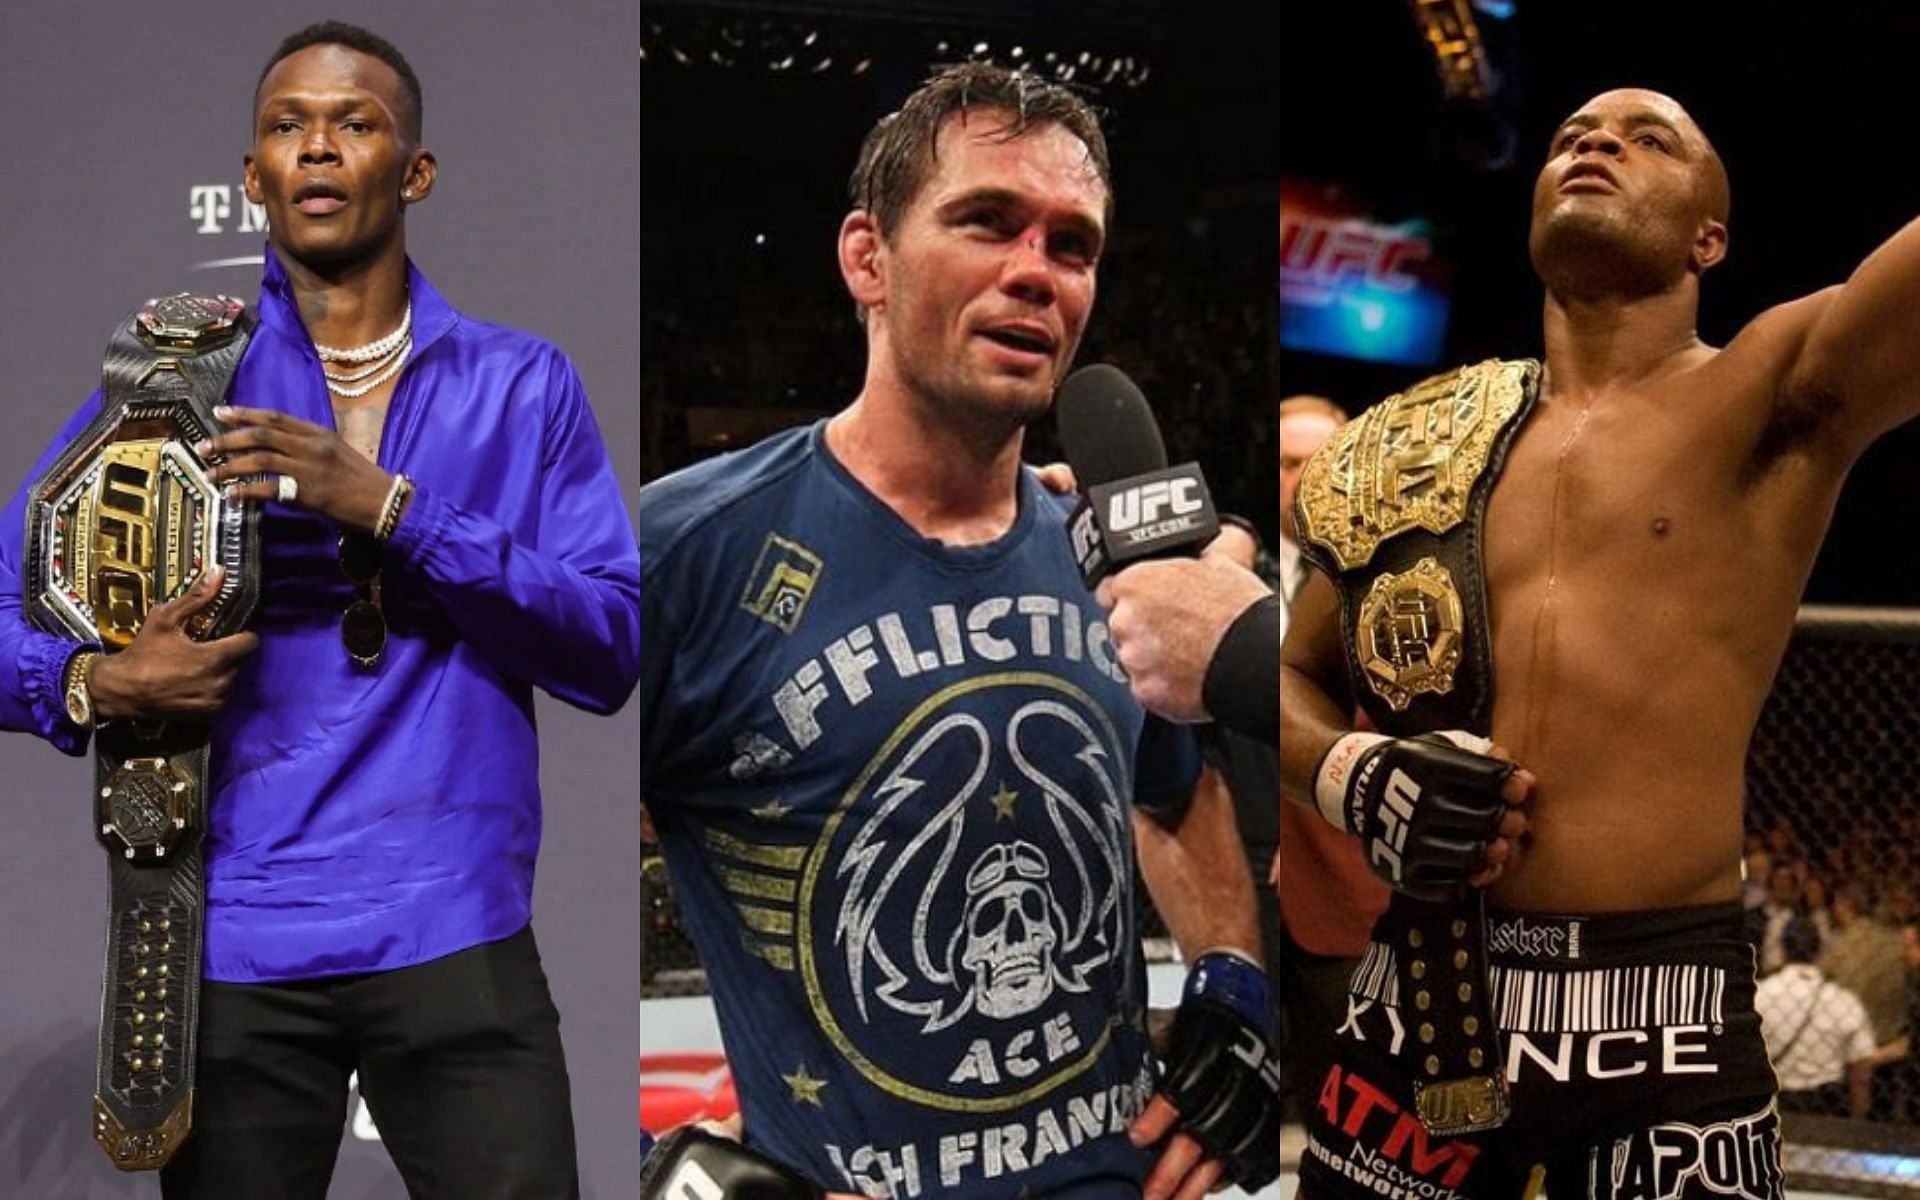 From left to right: Israel Adesanya, Rich Franklin, Anderson Silva [Image credit: UFC.com and @richacefranklin on Instagram]